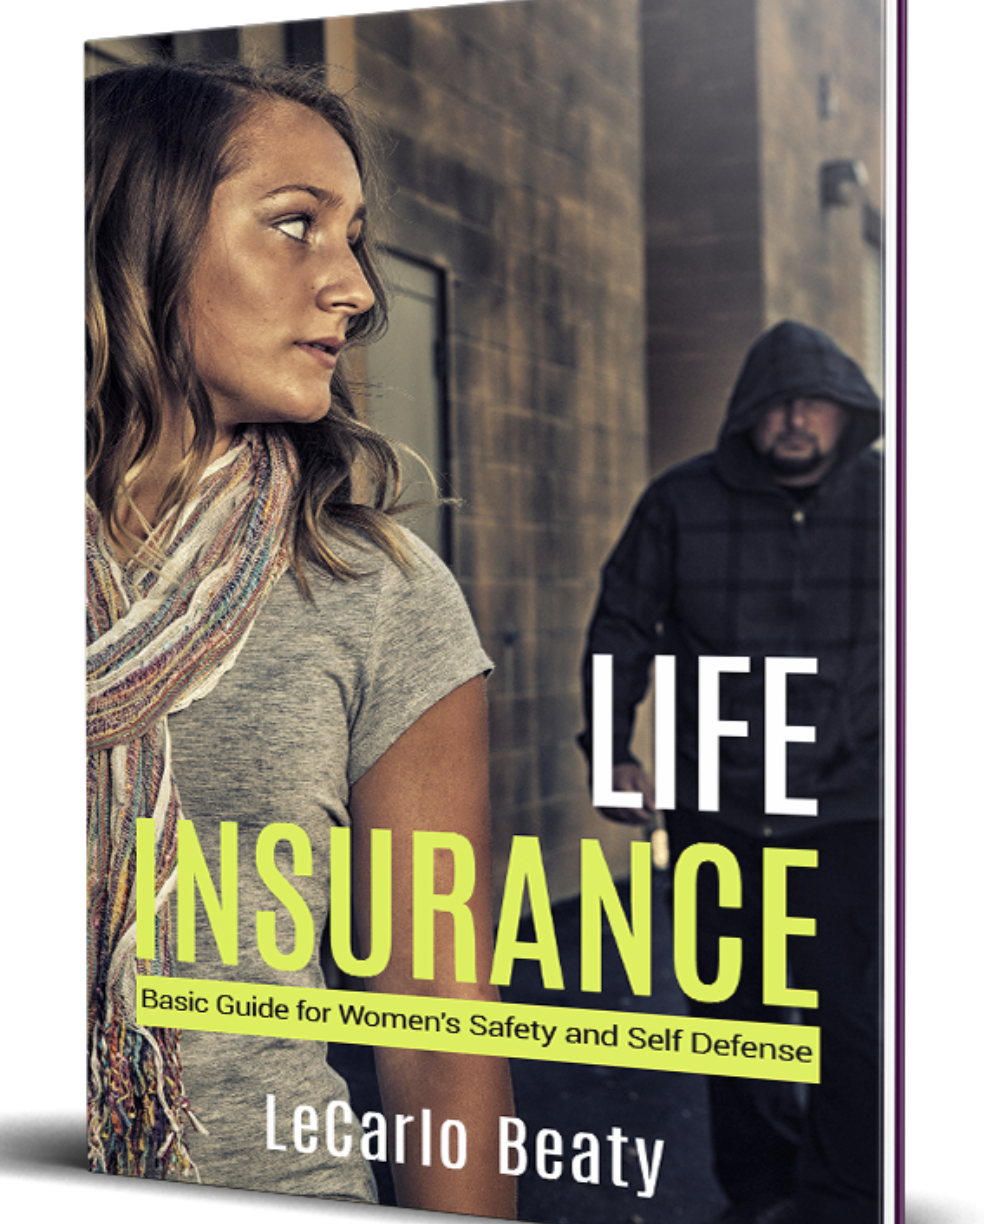 Life Insurance by LeCarlo Beaty a basic guide for women safety and self defense